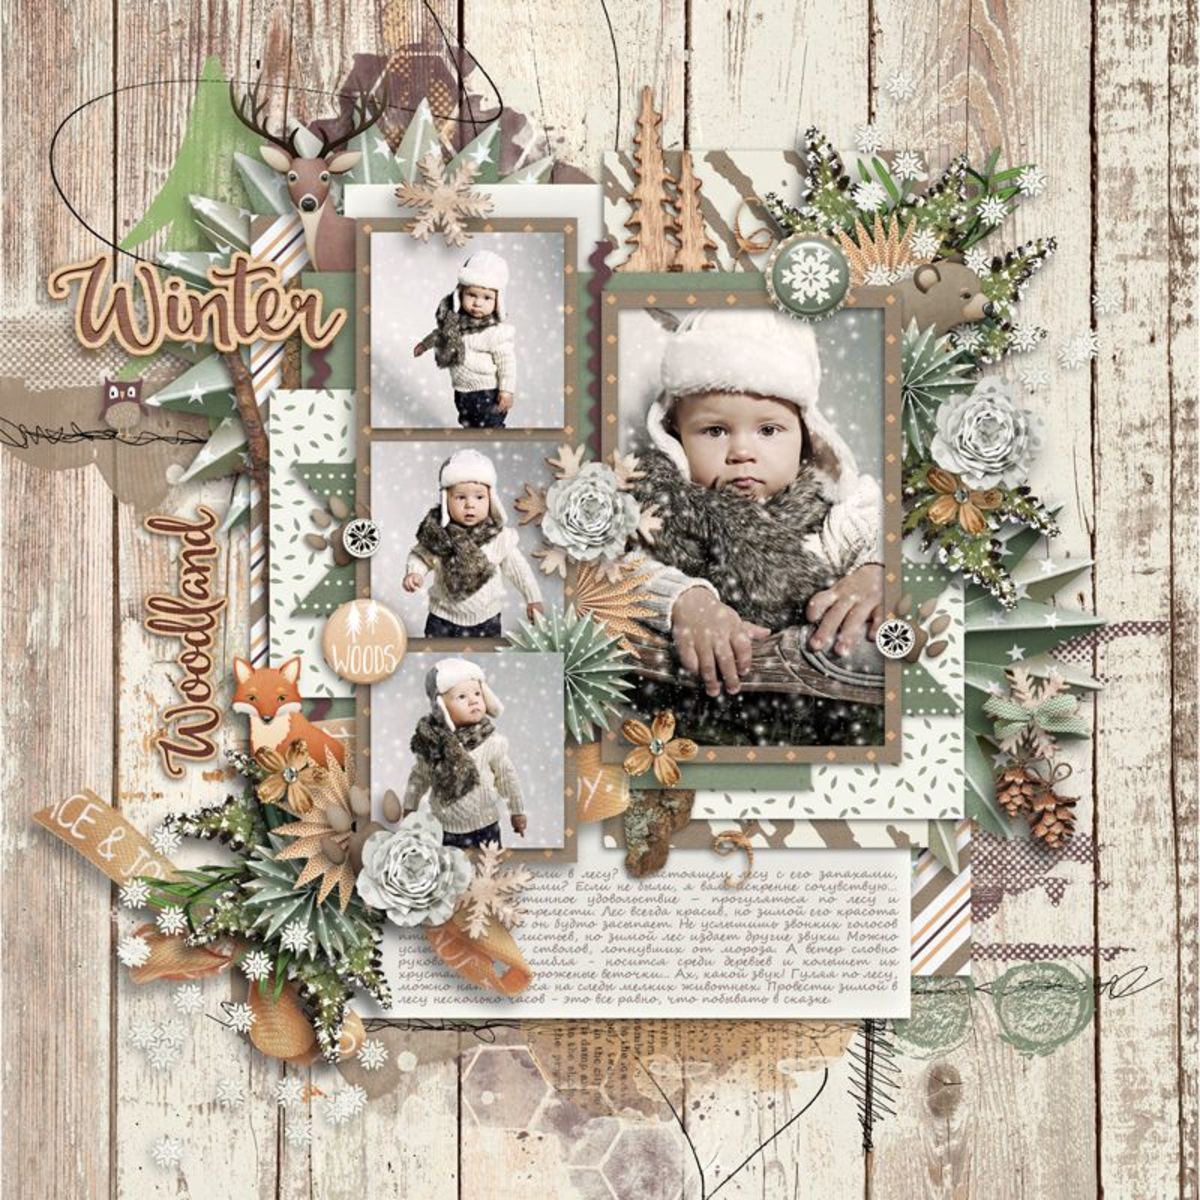 Scrapbook kits help you create professional looking scrapbook pages